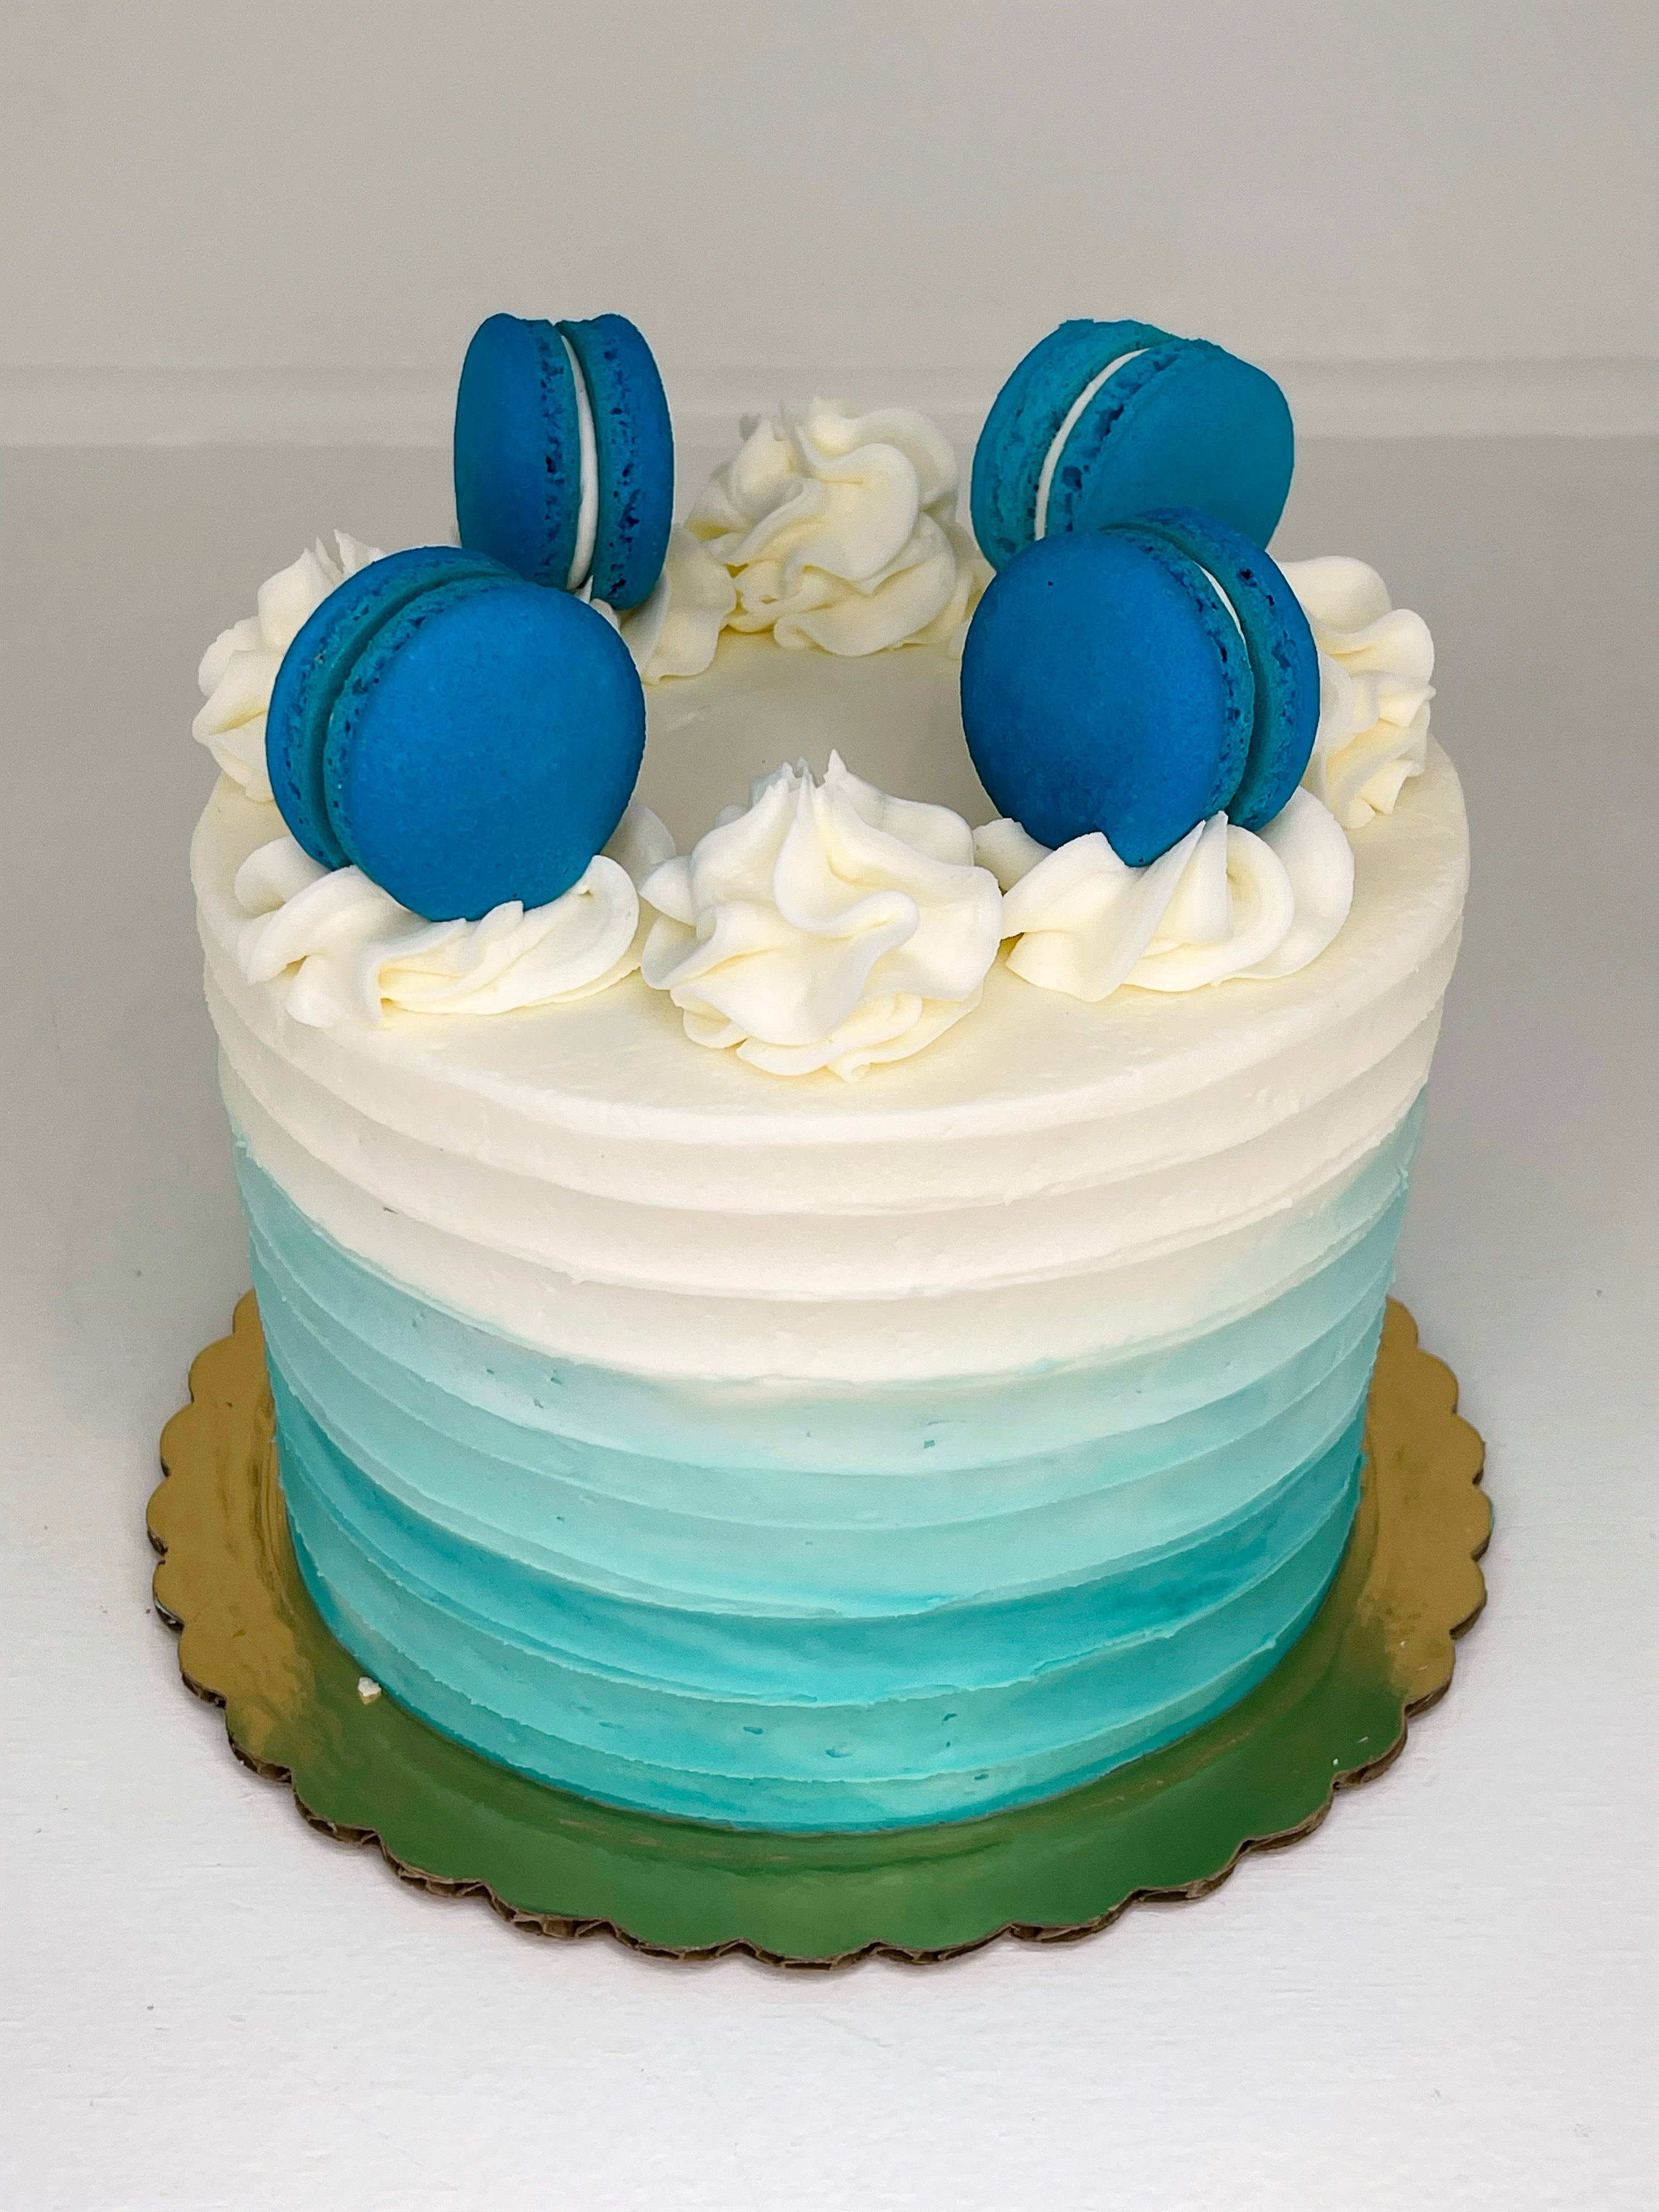 6" 12 Servings Teal Ombre Macarons Chocolate Cake